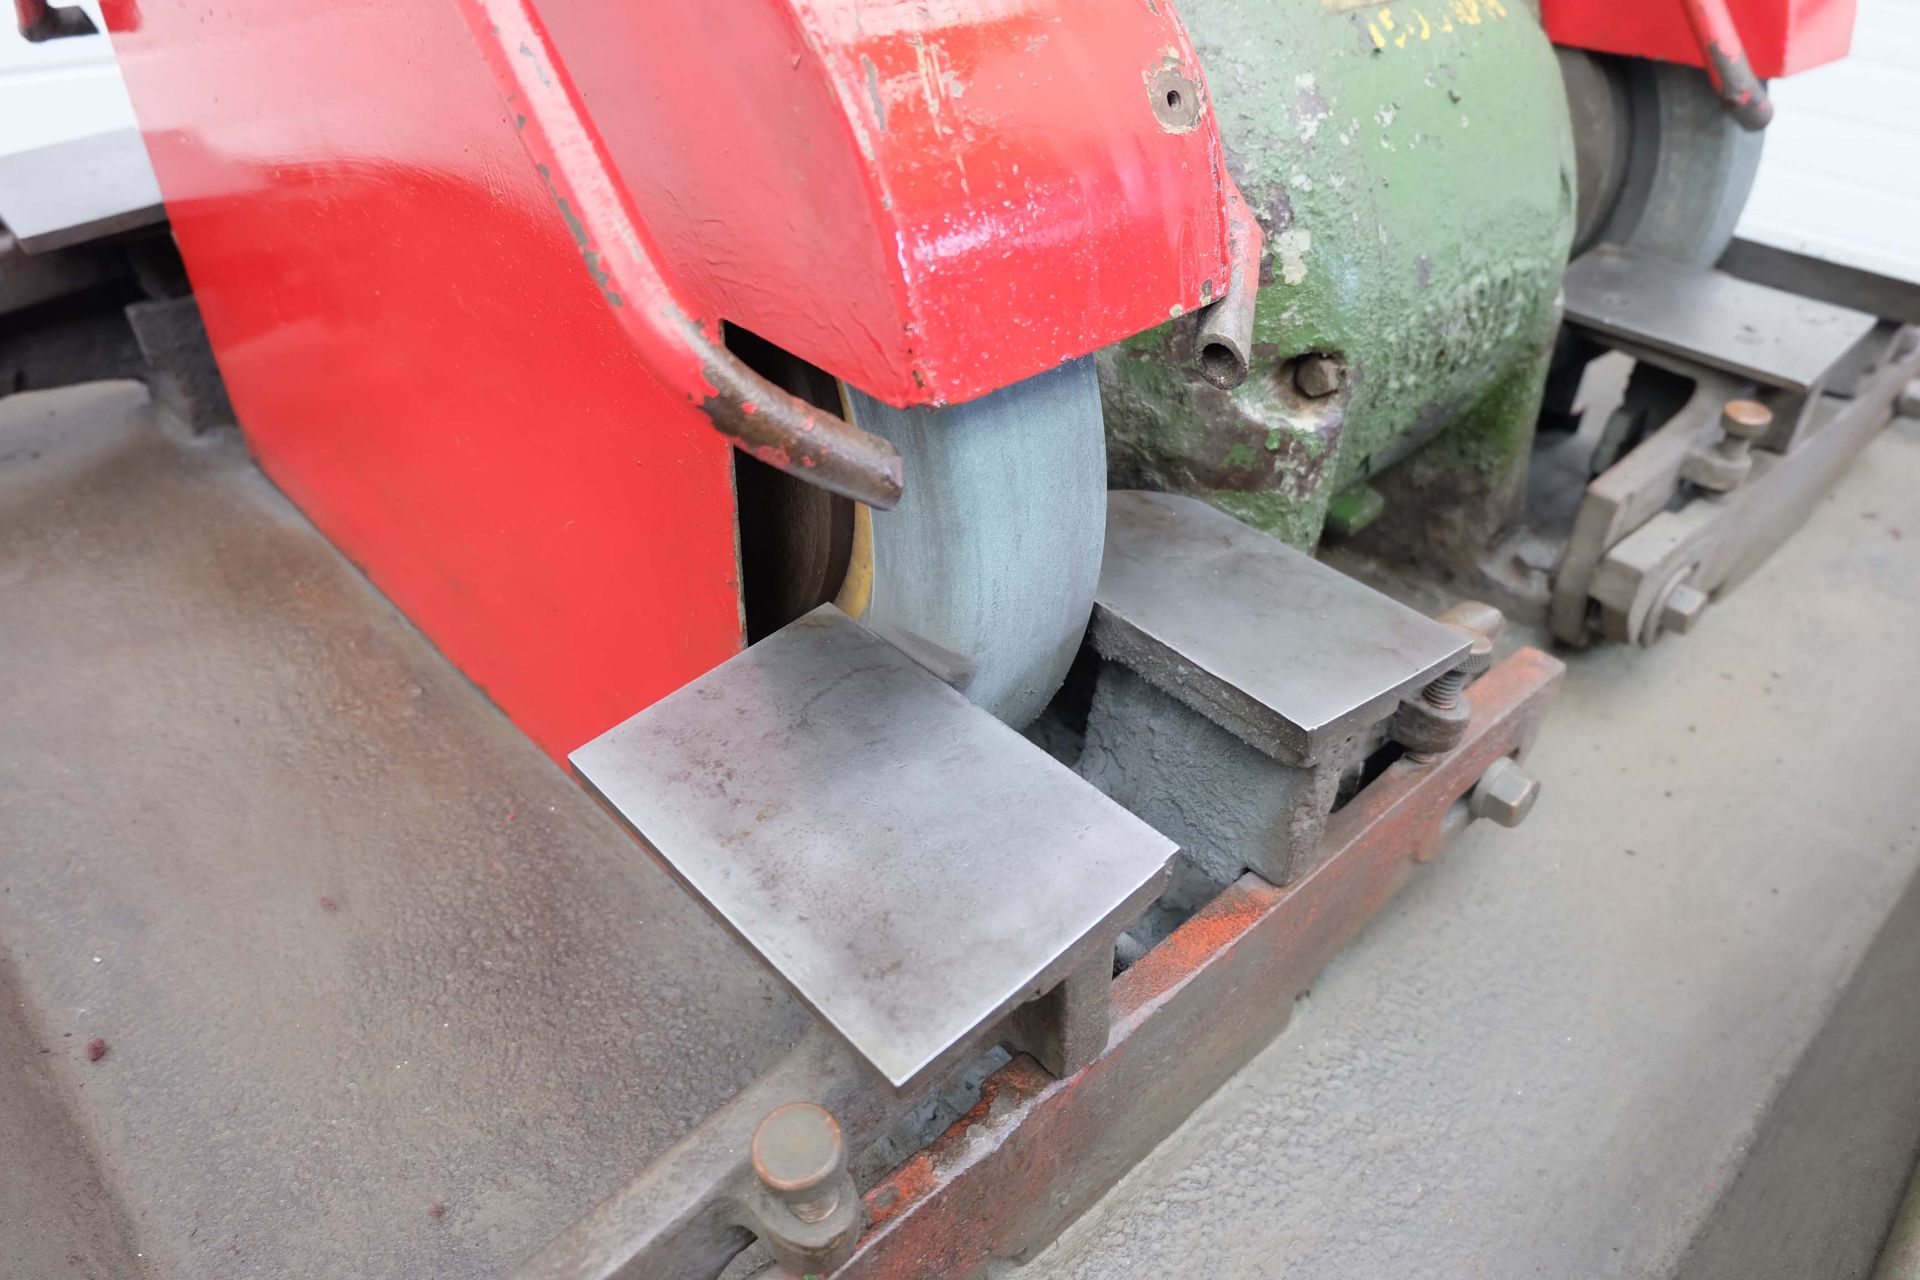 Lumsden Four Wheel Pedestal Grinder. Grinding Wheel Sizes: 14" x 3" Max. With Coolant Pump. - Image 3 of 11